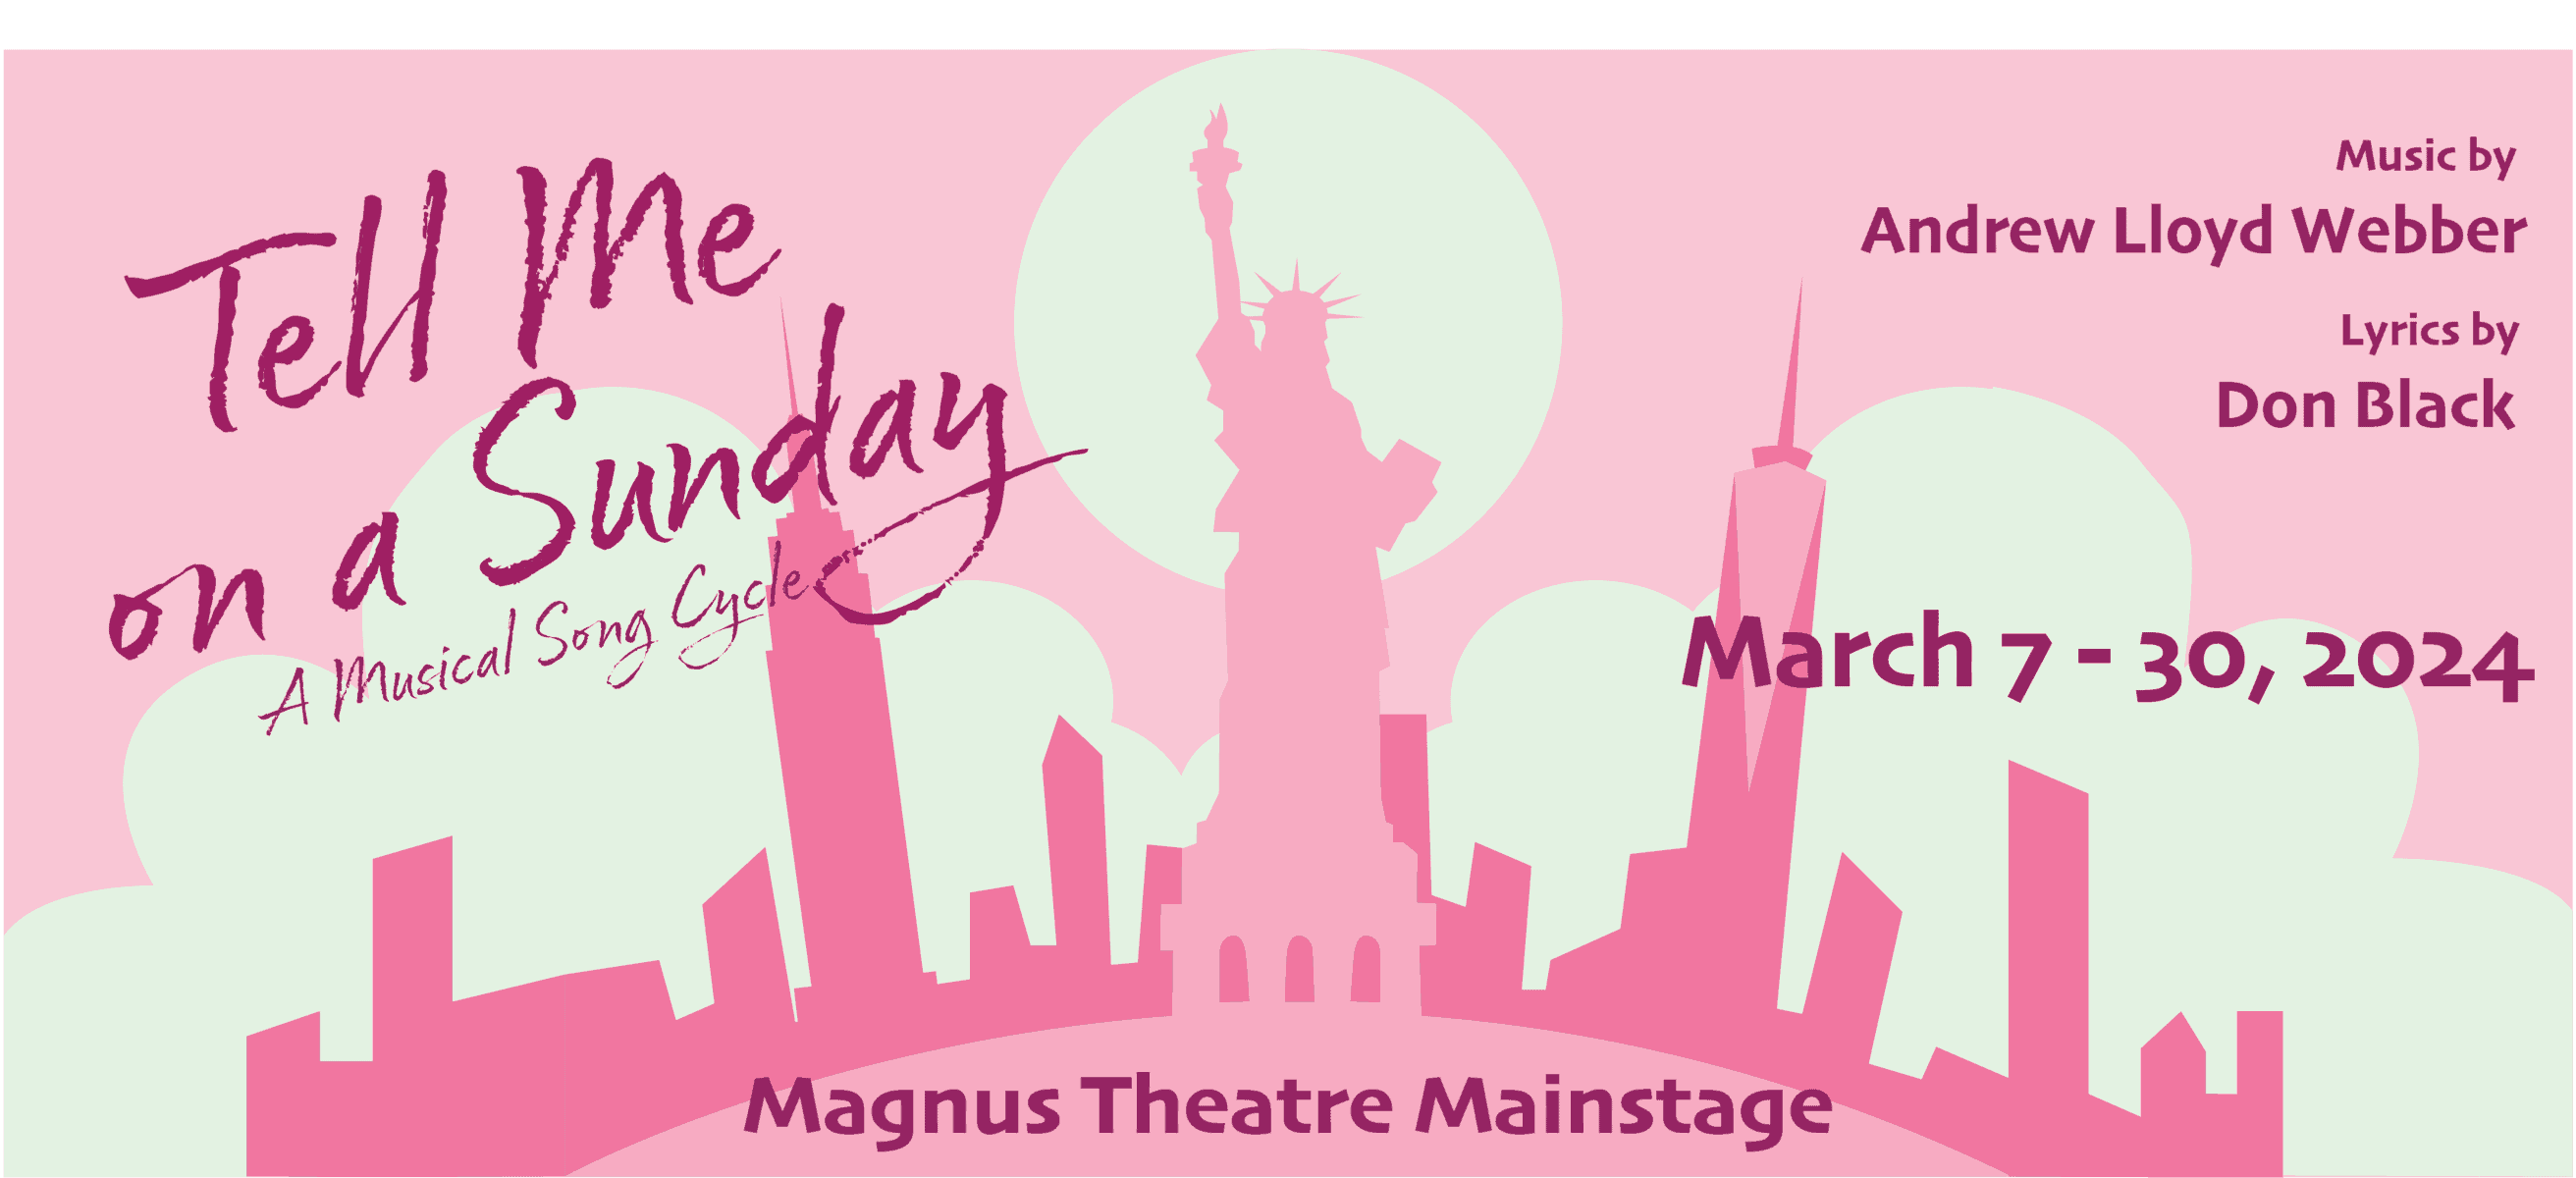 A one-act song cycle by Andrew Lloyd Webber, it tells the story of an ordinary English girl who journeys to
the United States in search of love. Her romantic misadventures begin in New York City, lead her to
Hollywood, and eventually take her back to Manhattan.